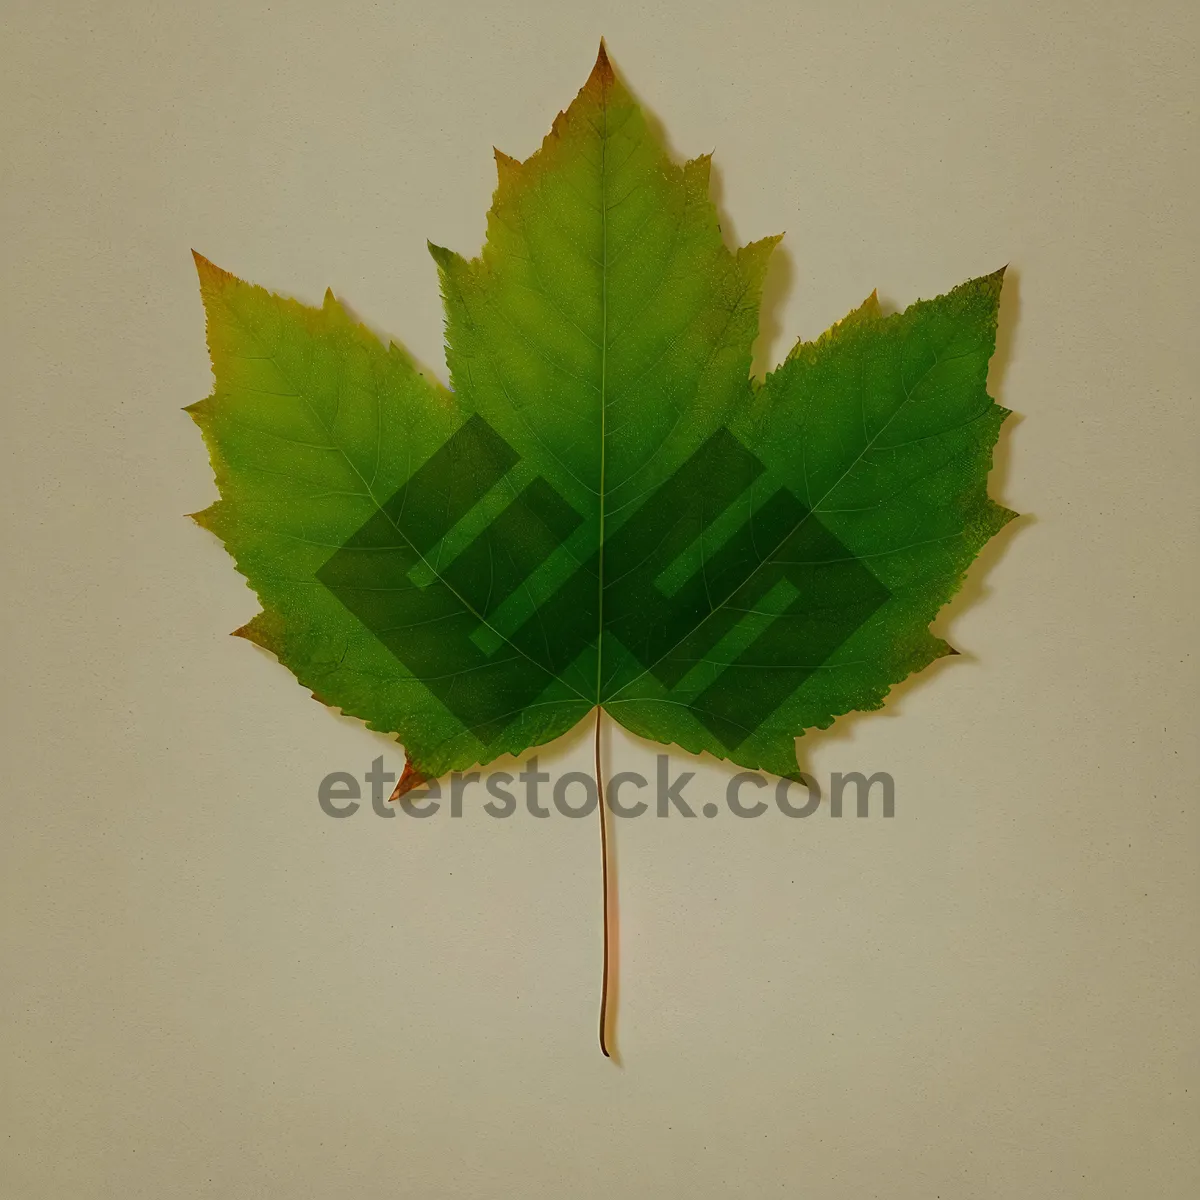 Picture of Vibrant Maple Leaf in Spring Garden